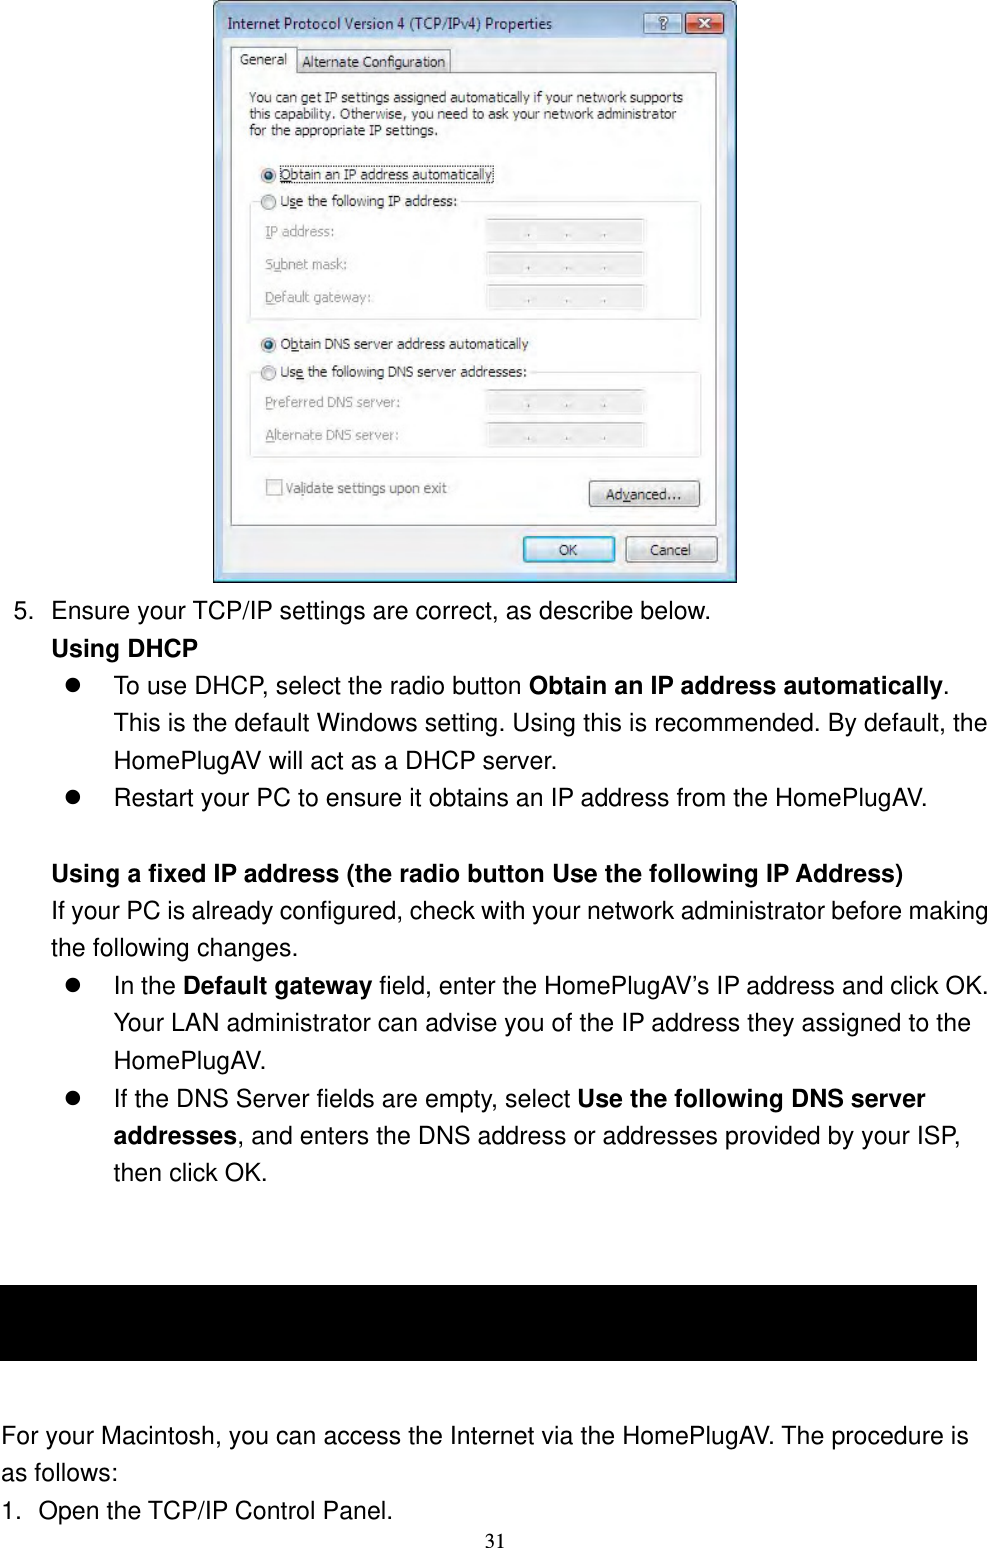  31                  5.  Ensure your TCP/IP settings are correct, as describe below. Using DHCP  To use DHCP, select the radio button Obtain an IP address automatically. This is the default Windows setting. Using this is recommended. By default, the HomePlugAV will act as a DHCP server.  Restart your PC to ensure it obtains an IP address from the HomePlugAV.   Using a fixed IP address (the radio button Use the following IP Address) If your PC is already configured, check with your network administrator before making the following changes.  In the Default gateway field, enter the HomePlugAV’s IP address and click OK. Your LAN administrator can advise you of the IP address they assigned to the HomePlugAV.  If the DNS Server fields are empty, select Use the following DNS server addresses, and enters the DNS address or addresses provided by your ISP, then click OK.   Macintosh Clients  For your Macintosh, you can access the Internet via the HomePlugAV. The procedure is as follows: 1.  Open the TCP/IP Control Panel. Macintosh Clients 